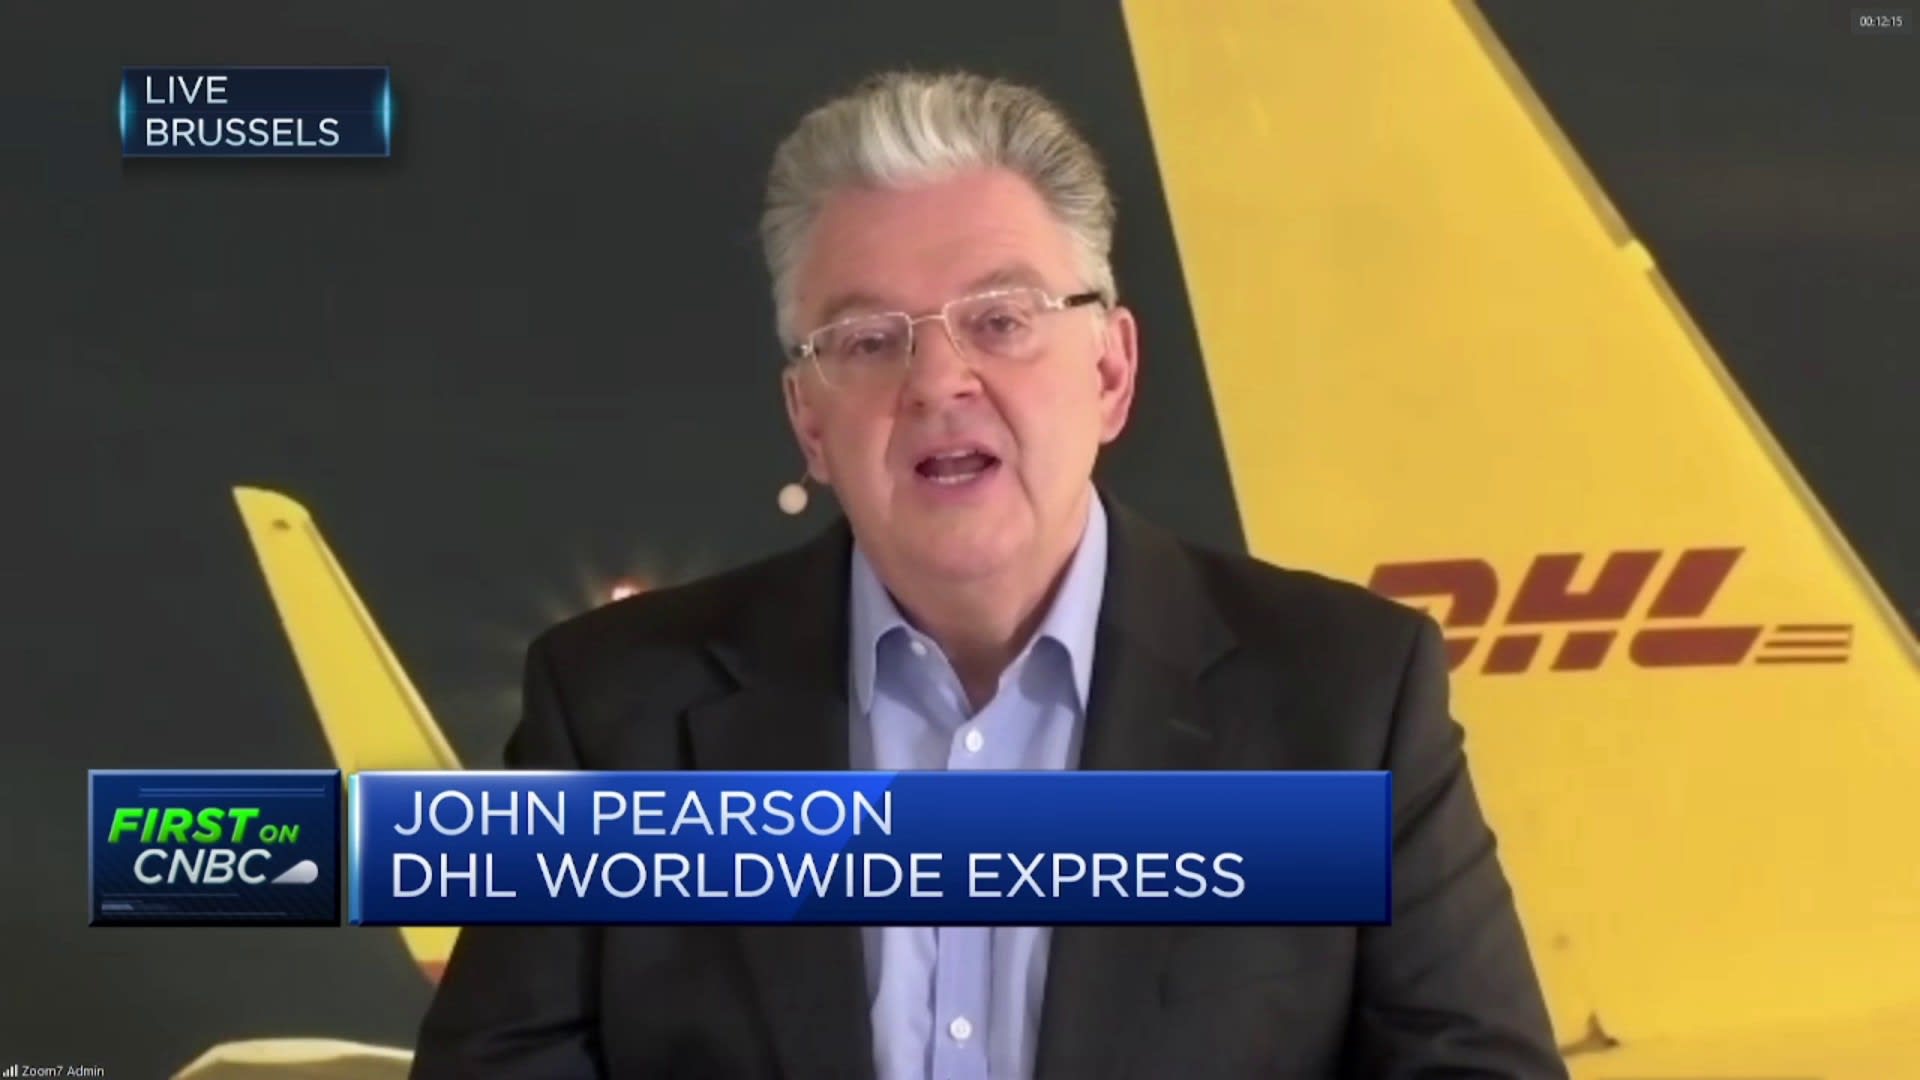 CEO of DHL Worldwide Express: Despite cloudy outlook, trade is 'self-resuscitating'